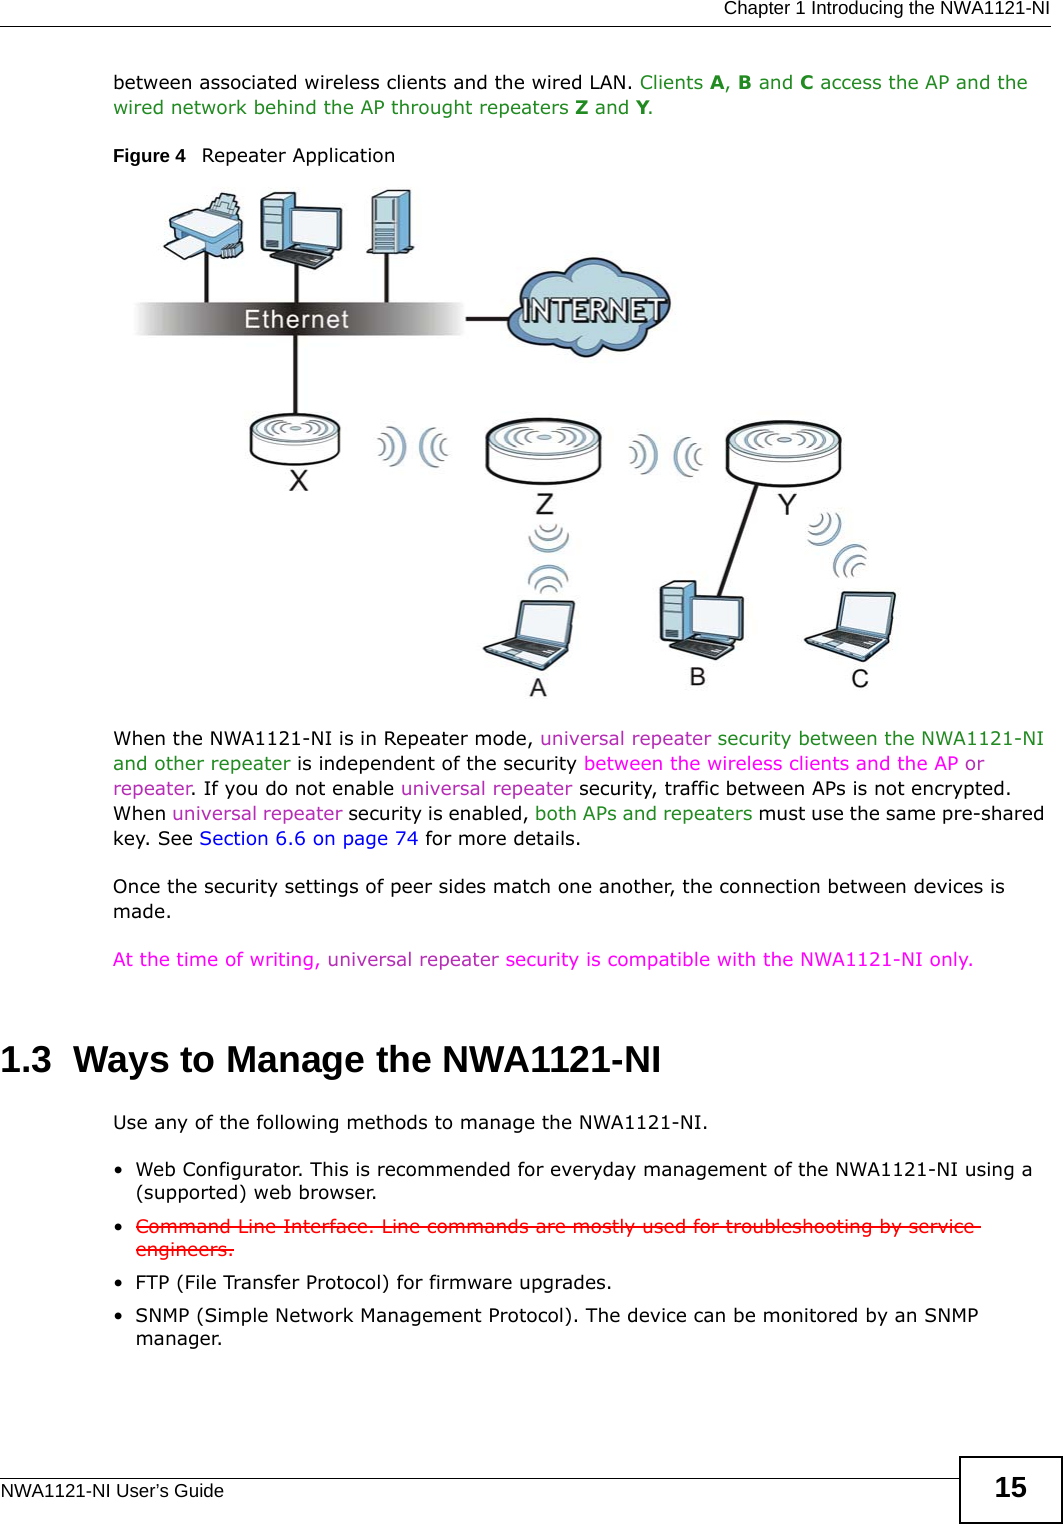  Chapter 1 Introducing the NWA1121-NINWA1121-NI User’s Guide 15between associated wireless clients and the wired LAN. Clients A, B and C access the AP and the wired network behind the AP throught repeaters Z and Y.Figure 4   Repeater ApplicationWhen the NWA1121-NI is in Repeater mode, universal repeater security between the NWA1121-NI and other repeater is independent of the security between the wireless clients and the AP or repeater. If you do not enable universal repeater security, traffic between APs is not encrypted. When universal repeater security is enabled, both APs and repeaters must use the same pre-shared key. See Section 6.6 on page 74 for more details. Once the security settings of peer sides match one another, the connection between devices is made.At the time of writing, universal repeater security is compatible with the NWA1121-NI only. 1.3  Ways to Manage the NWA1121-NIUse any of the following methods to manage the NWA1121-NI.• Web Configurator. This is recommended for everyday management of the NWA1121-NI using a (supported) web browser.•Command Line Interface. Line commands are mostly used for troubleshooting by service engineers.• FTP (File Transfer Protocol) for firmware upgrades.• SNMP (Simple Network Management Protocol). The device can be monitored by an SNMP manager.